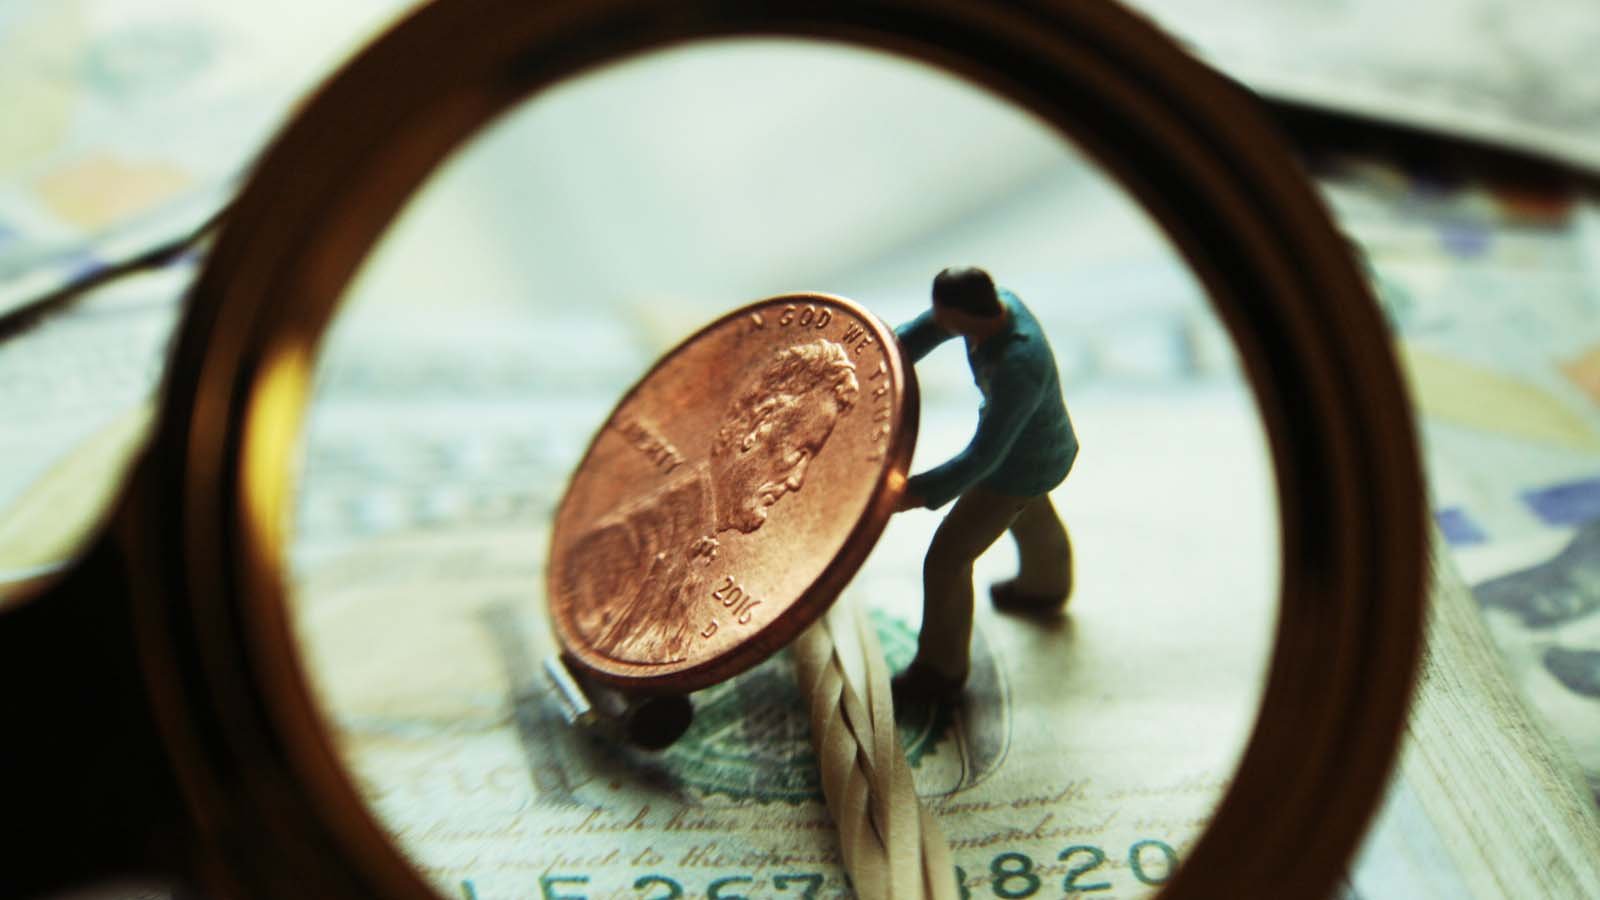 Tiny man holding up normal sized penny under a magnifying glass representing ACRX stock.